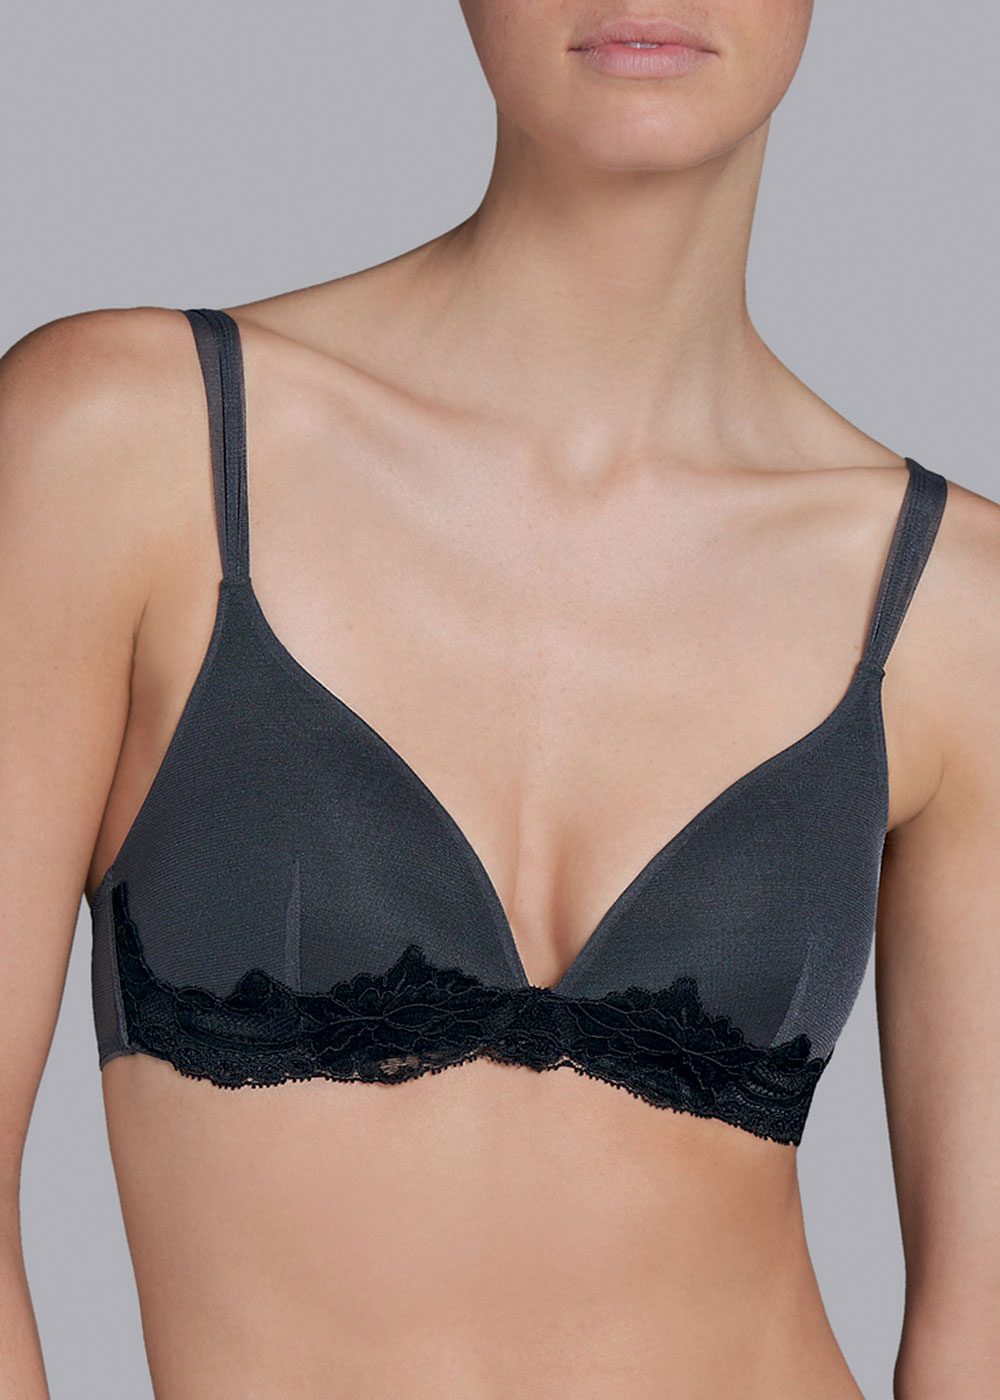 Soutien-gorge Triangle Andres Sarda Givre